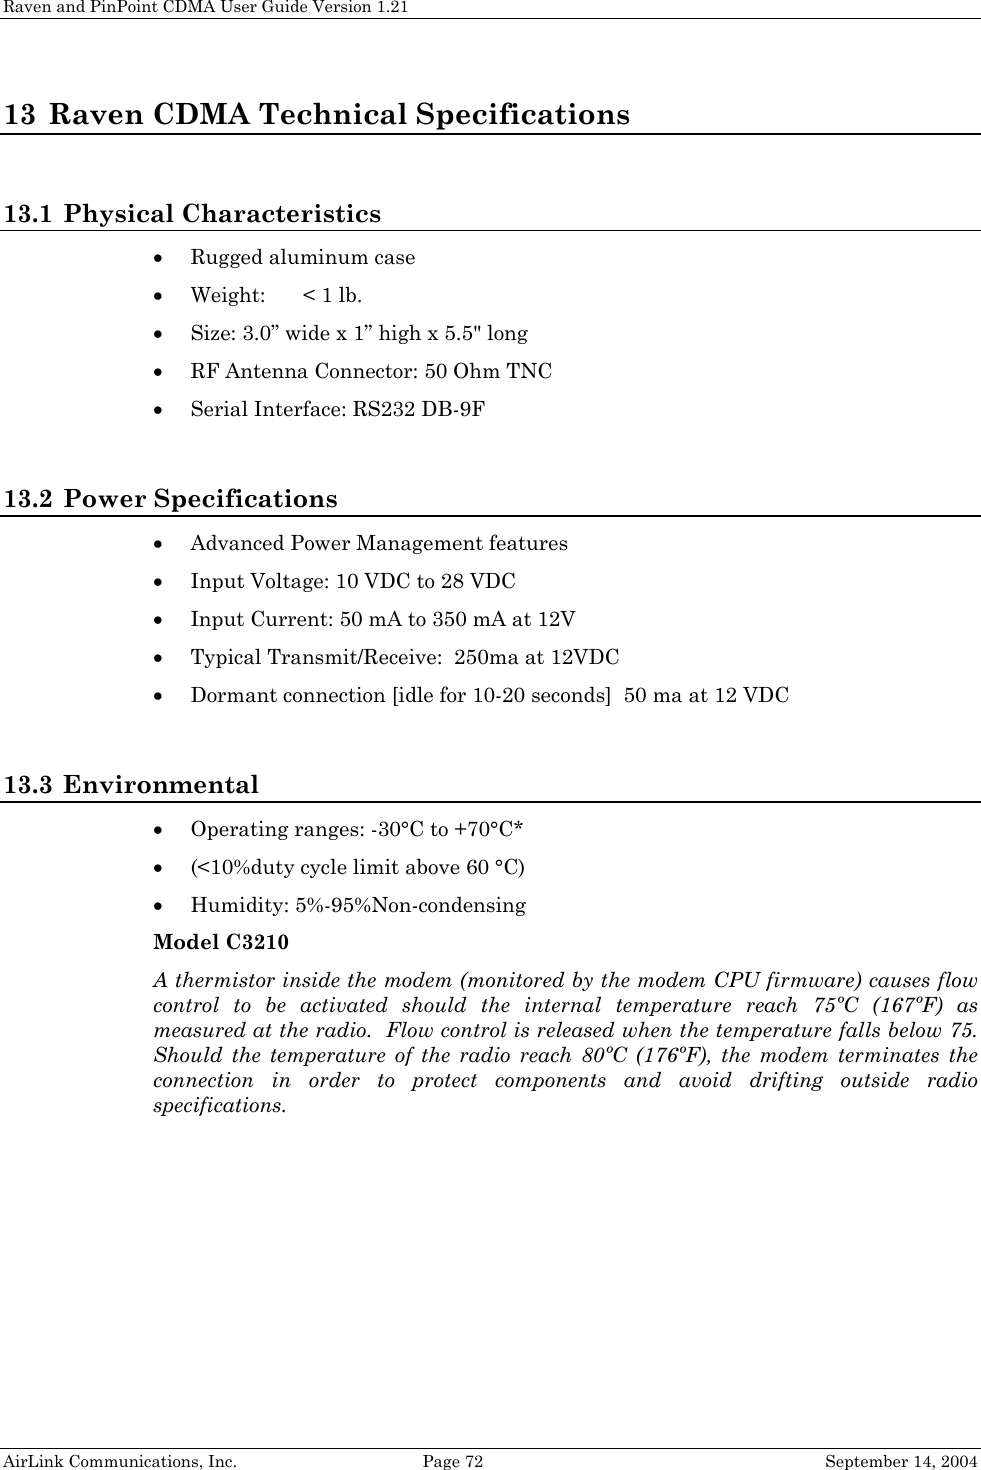 Raven and PinPoint CDMA User Guide Version 1.21 AirLink Communications, Inc.  Page 72  September 14, 2004 13 Raven CDMA Technical Specifications  13.1 Physical Characteristics • Rugged aluminum case • Weight:  &lt; 1 lb. • Size: 3.0” wide x 1” high x 5.5&quot; long  • RF Antenna Connector: 50 Ohm TNC • Serial Interface: RS232 DB-9F  13.2 Power Specifications • Advanced Power Management features • Input Voltage: 10 VDC to 28 VDC • Input Current: 50 mA to 350 mA at 12V • Typical Transmit/Receive:  250ma at 12VDC • Dormant connection [idle for 10-20 seconds]  50 ma at 12 VDC  13.3 Environmental • Operating ranges: -30°C to +70°C* • (&lt;10%duty cycle limit above 60 °C) • Humidity: 5%-95%Non-condensing Model C3210 A thermistor inside the modem (monitored by the modem CPU firmware) causes flow control to be activated should the internal temperature reach 75ºC (167ºF) as measured at the radio.  Flow control is released when the temperature falls below 75.  Should the temperature of the radio reach 80ºC (176ºF), the modem terminates the connection in order to protect components and avoid drifting outside radio specifications.  